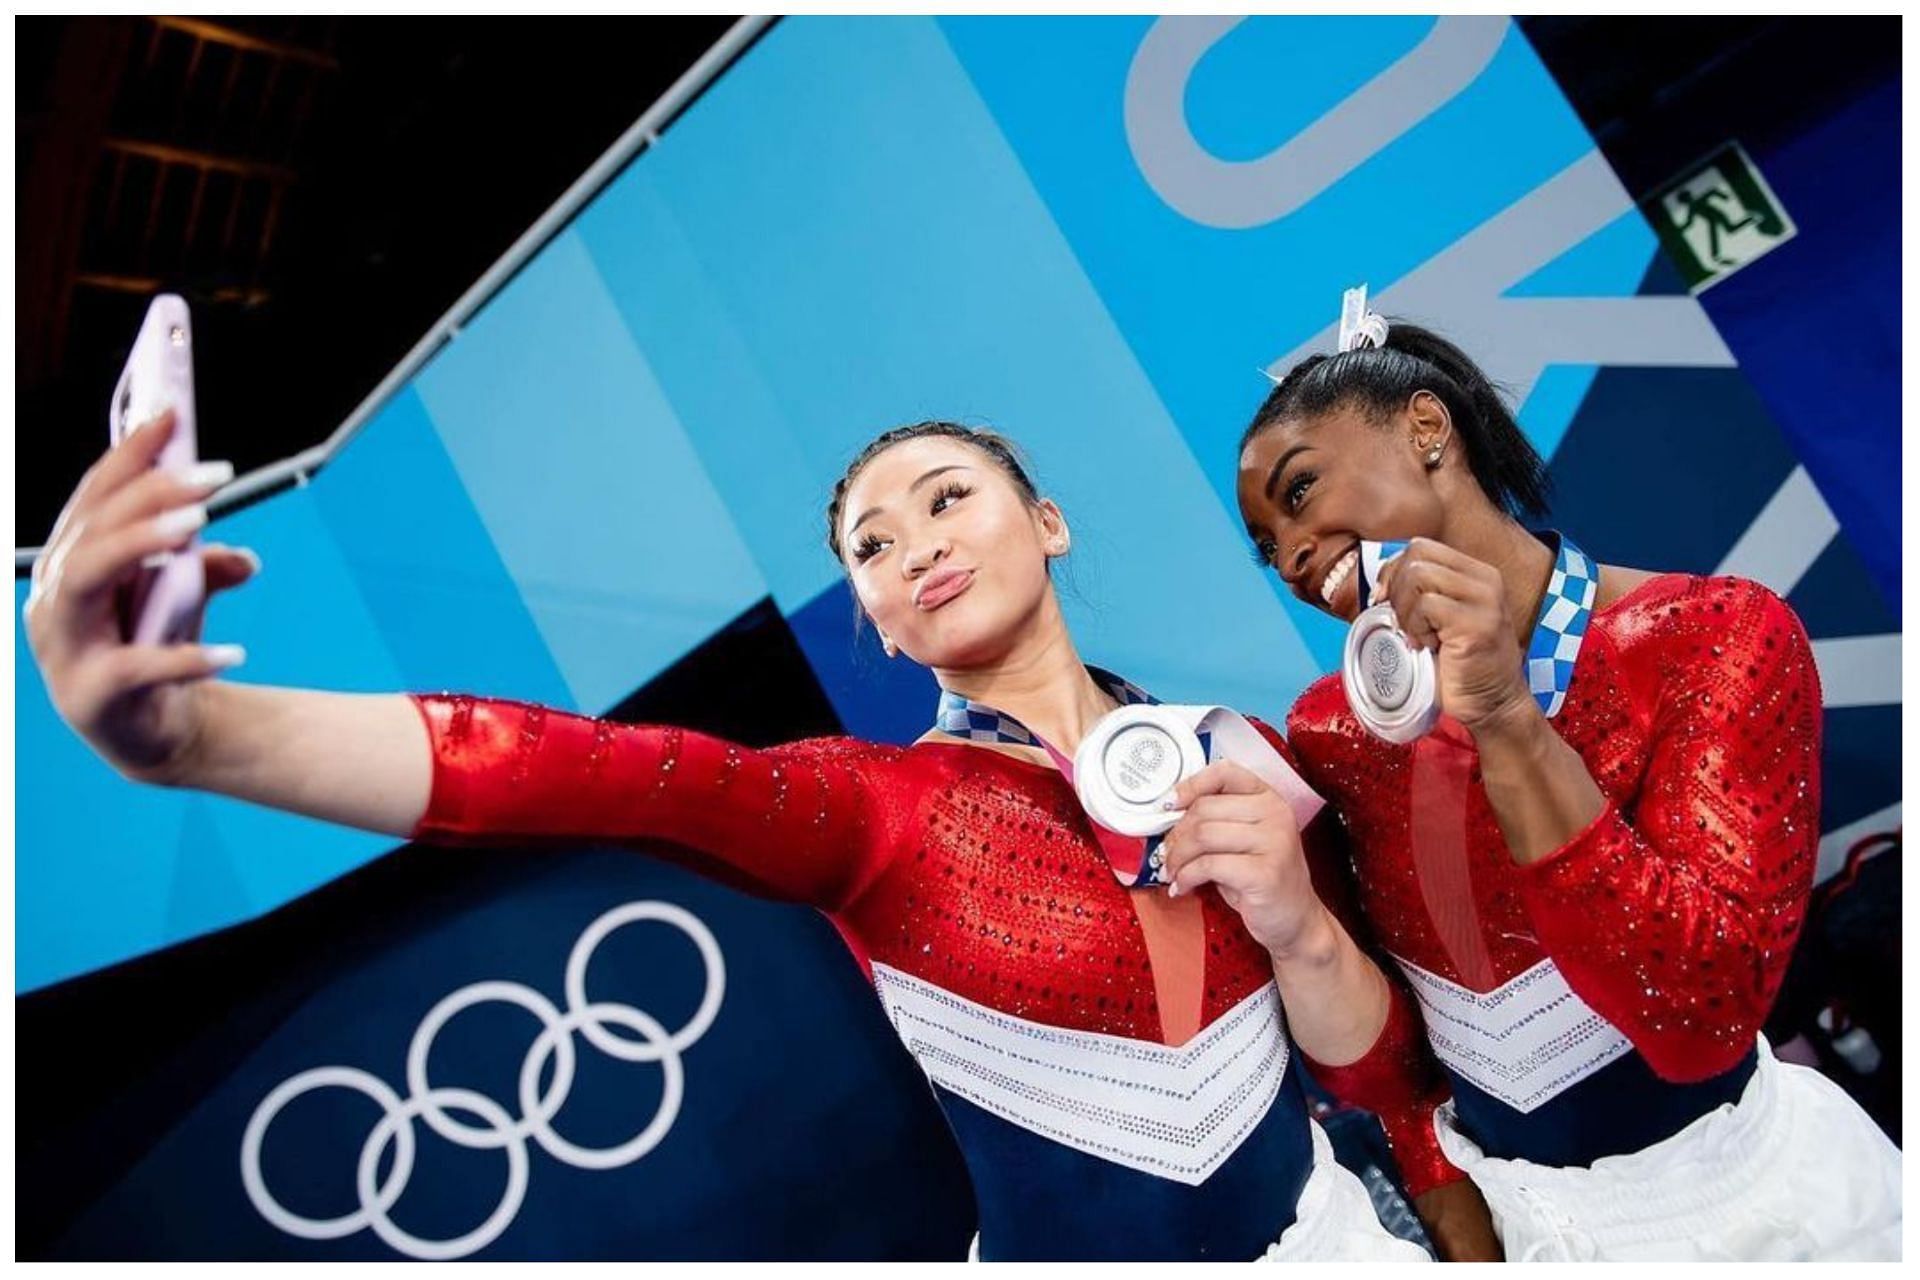 American Gymnasts Sunisa Lee and Simone Biles poses with their medals after the Tokyo Olympics (Image via Instagram @simonebiles)